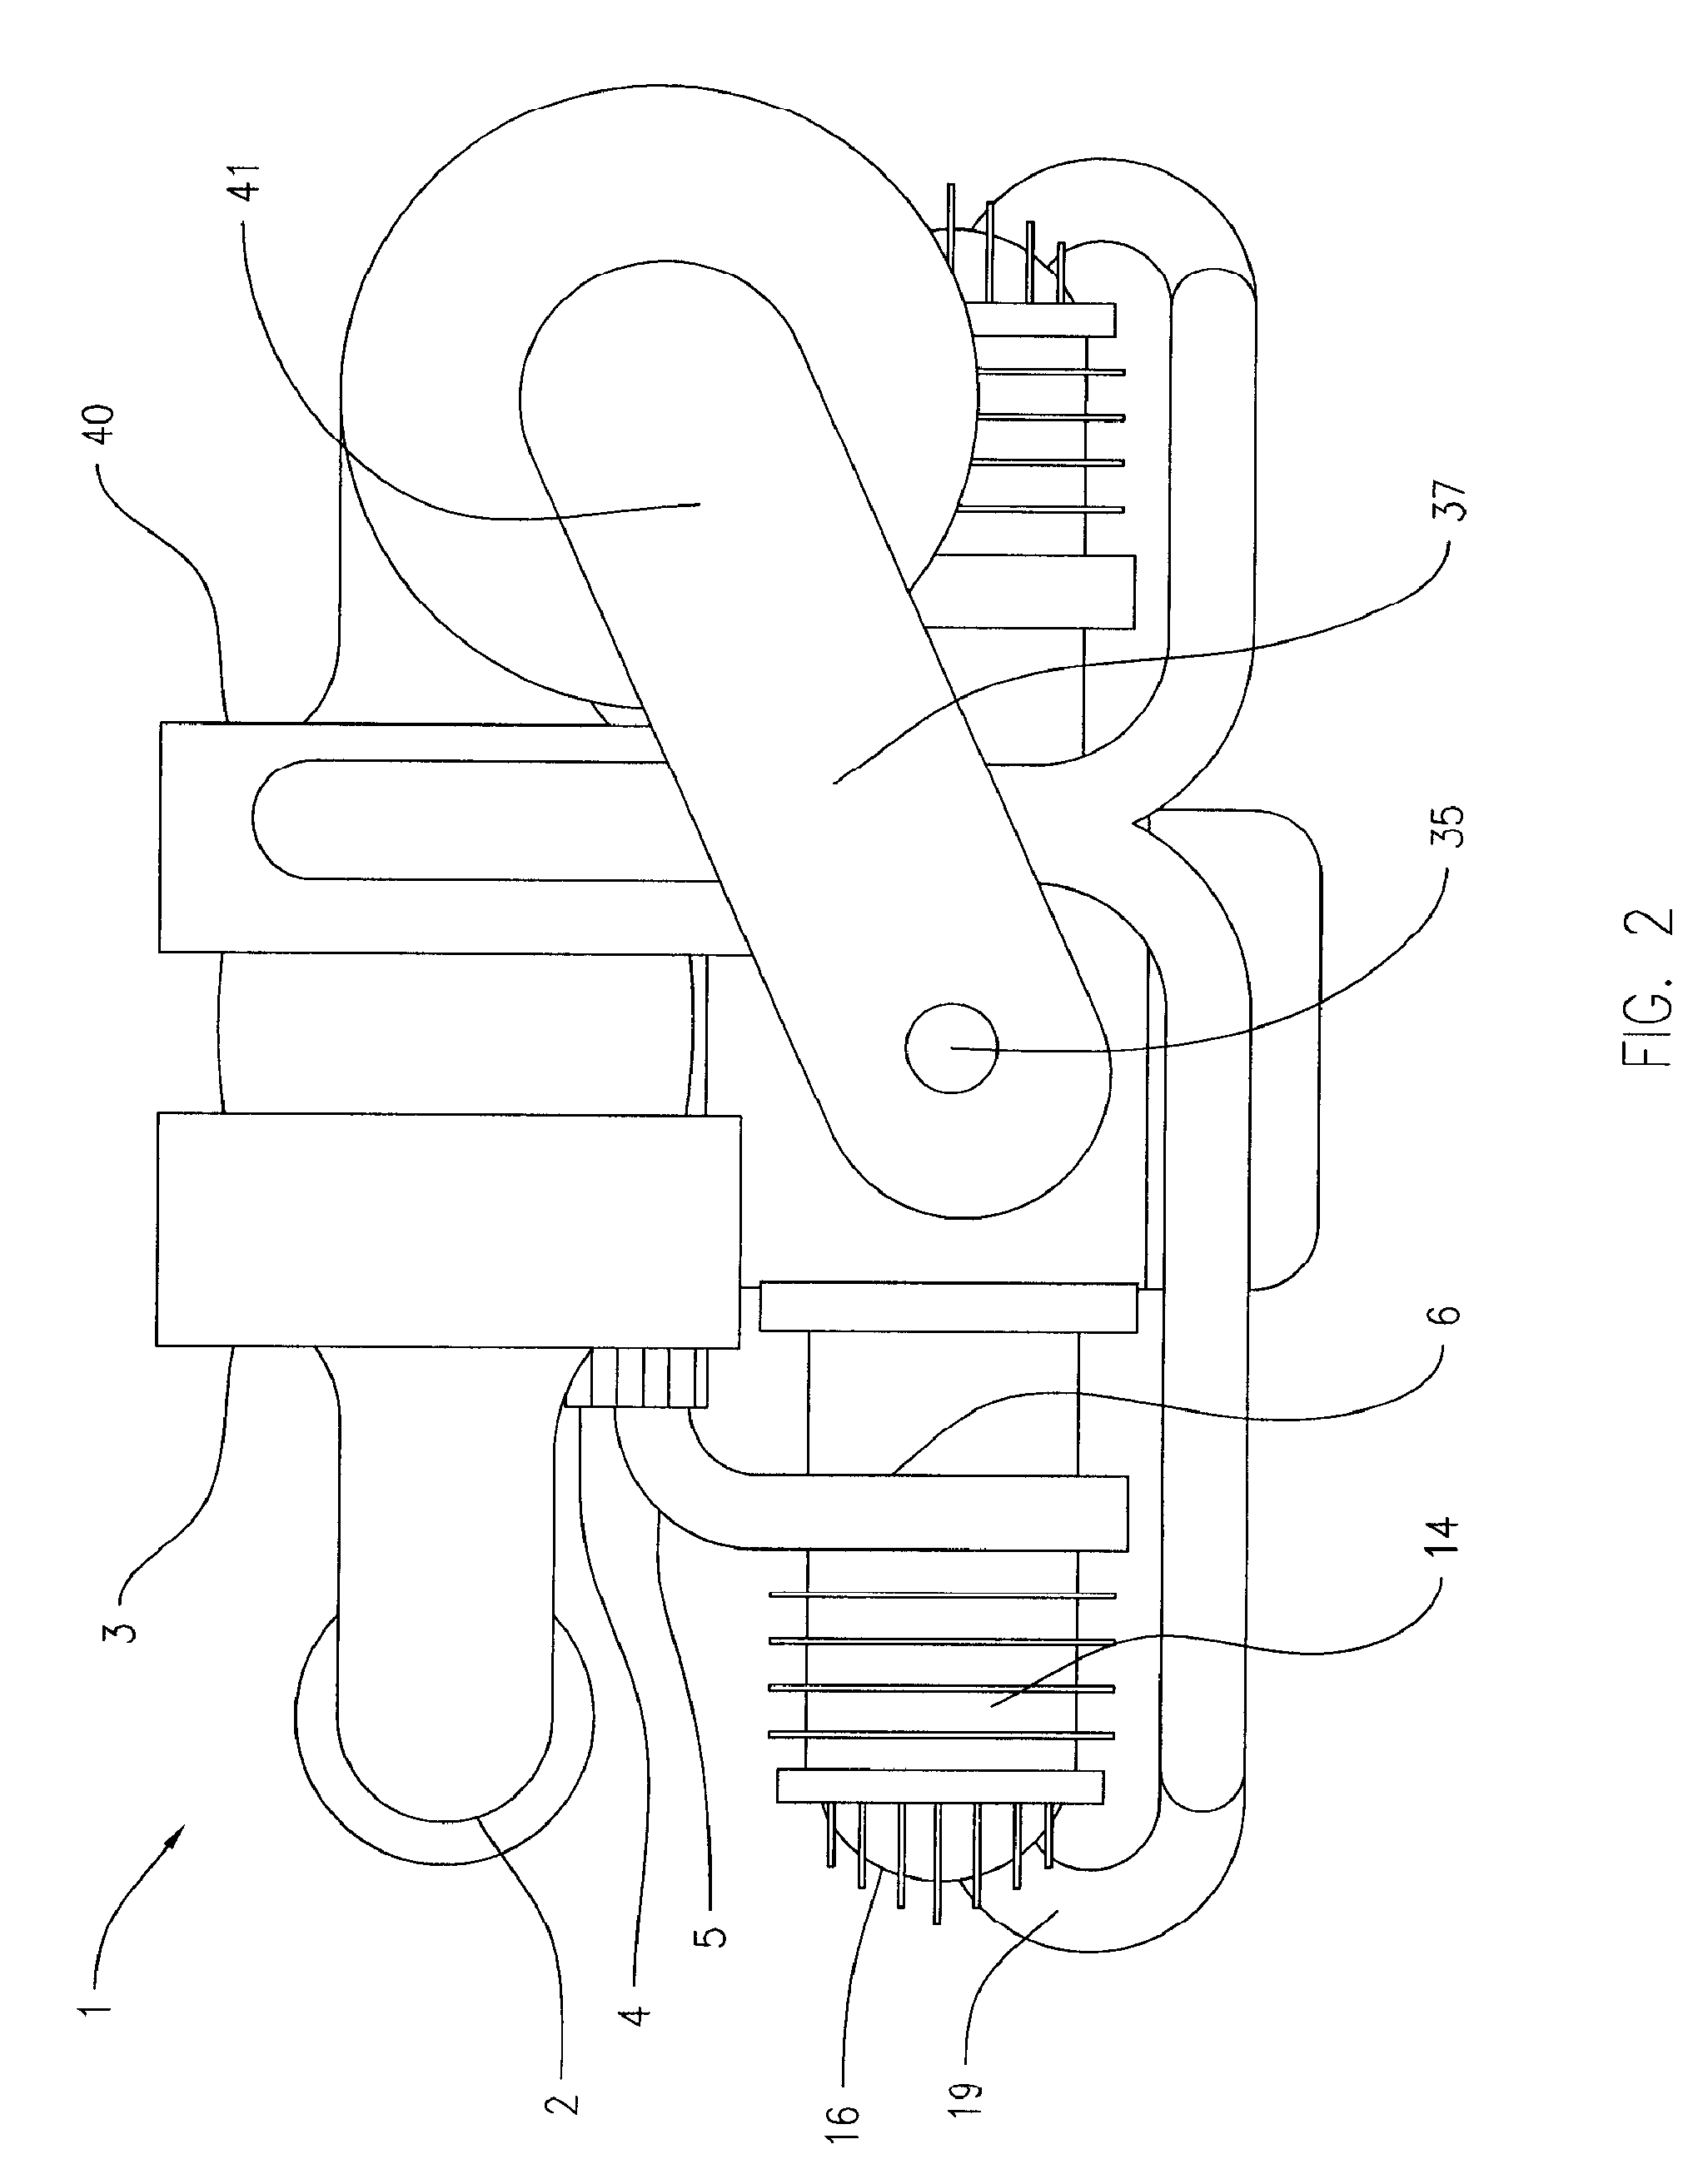 Two-stroke uniflow turbo-compound internal combustion engine